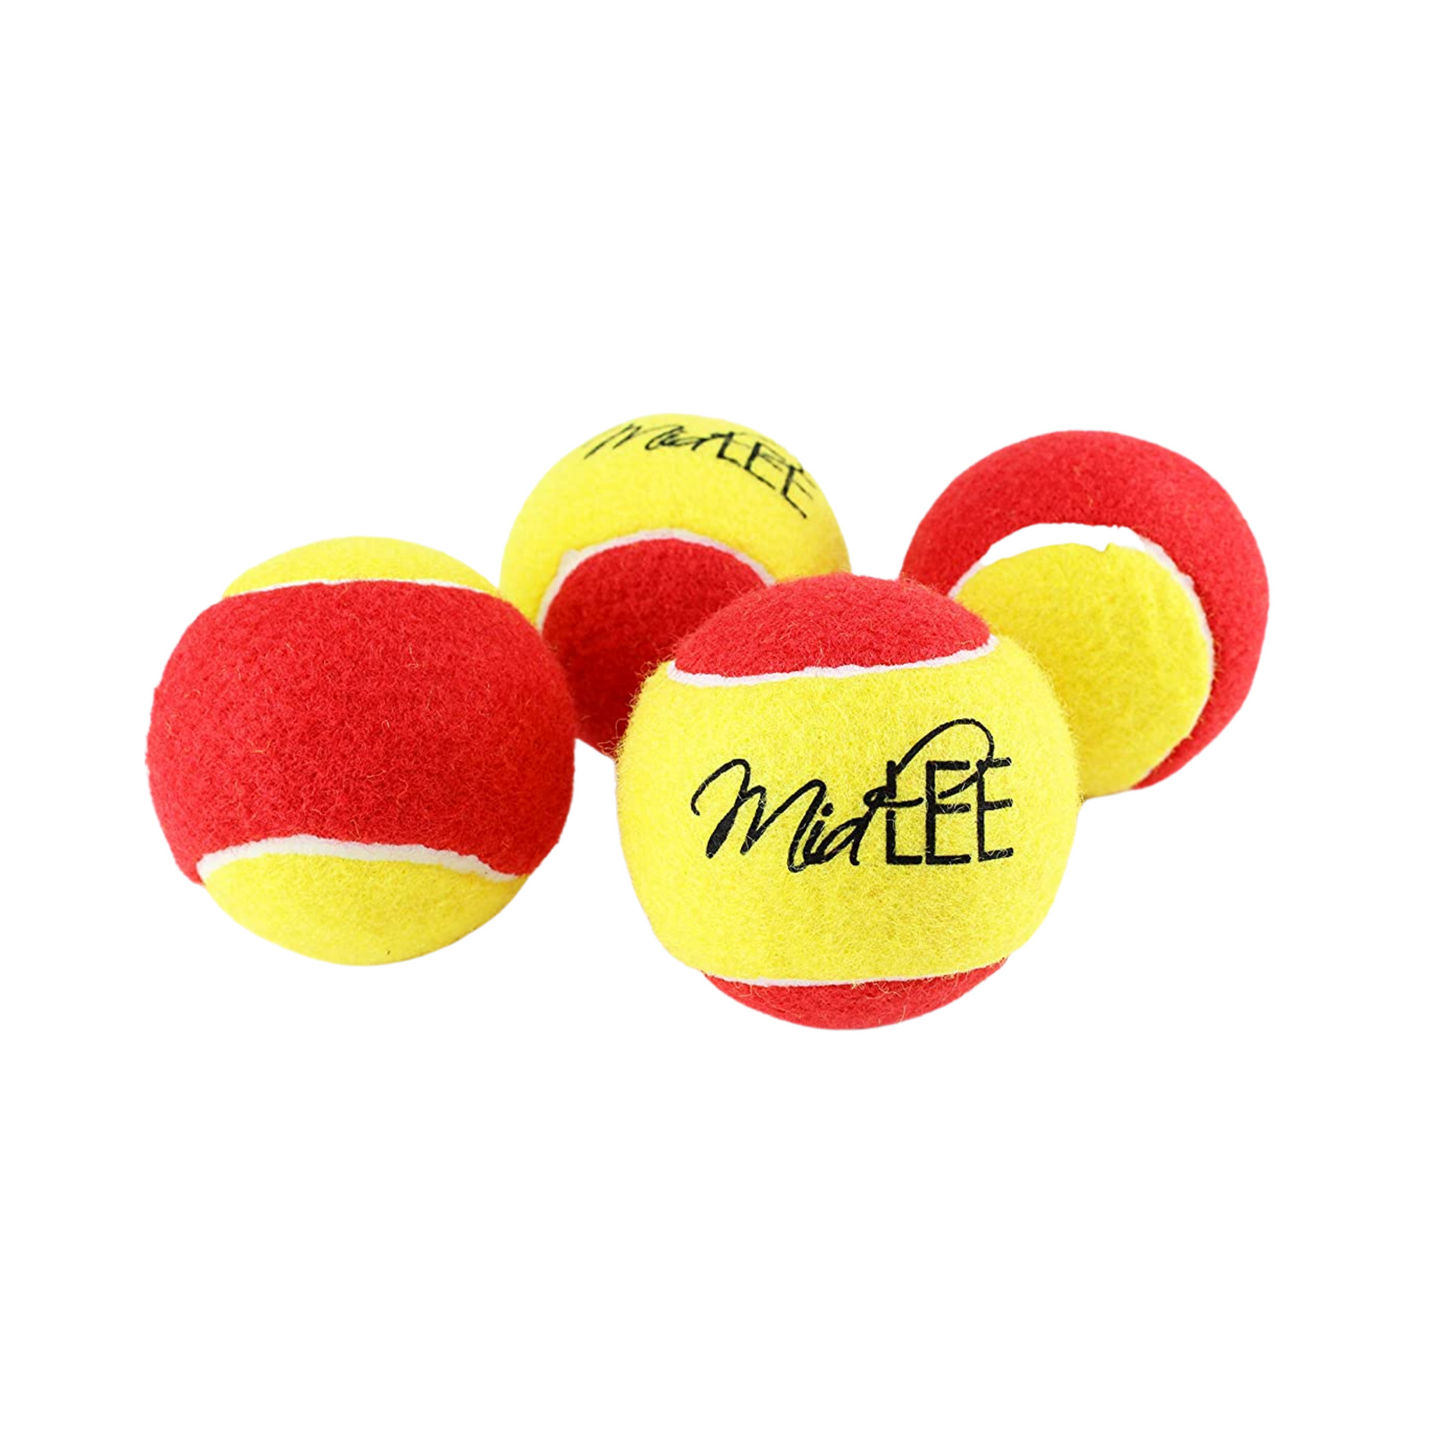 Midlee 3 Inch Large Tennis Balls for Dogs, Pack of 4 Durable Toy Balls